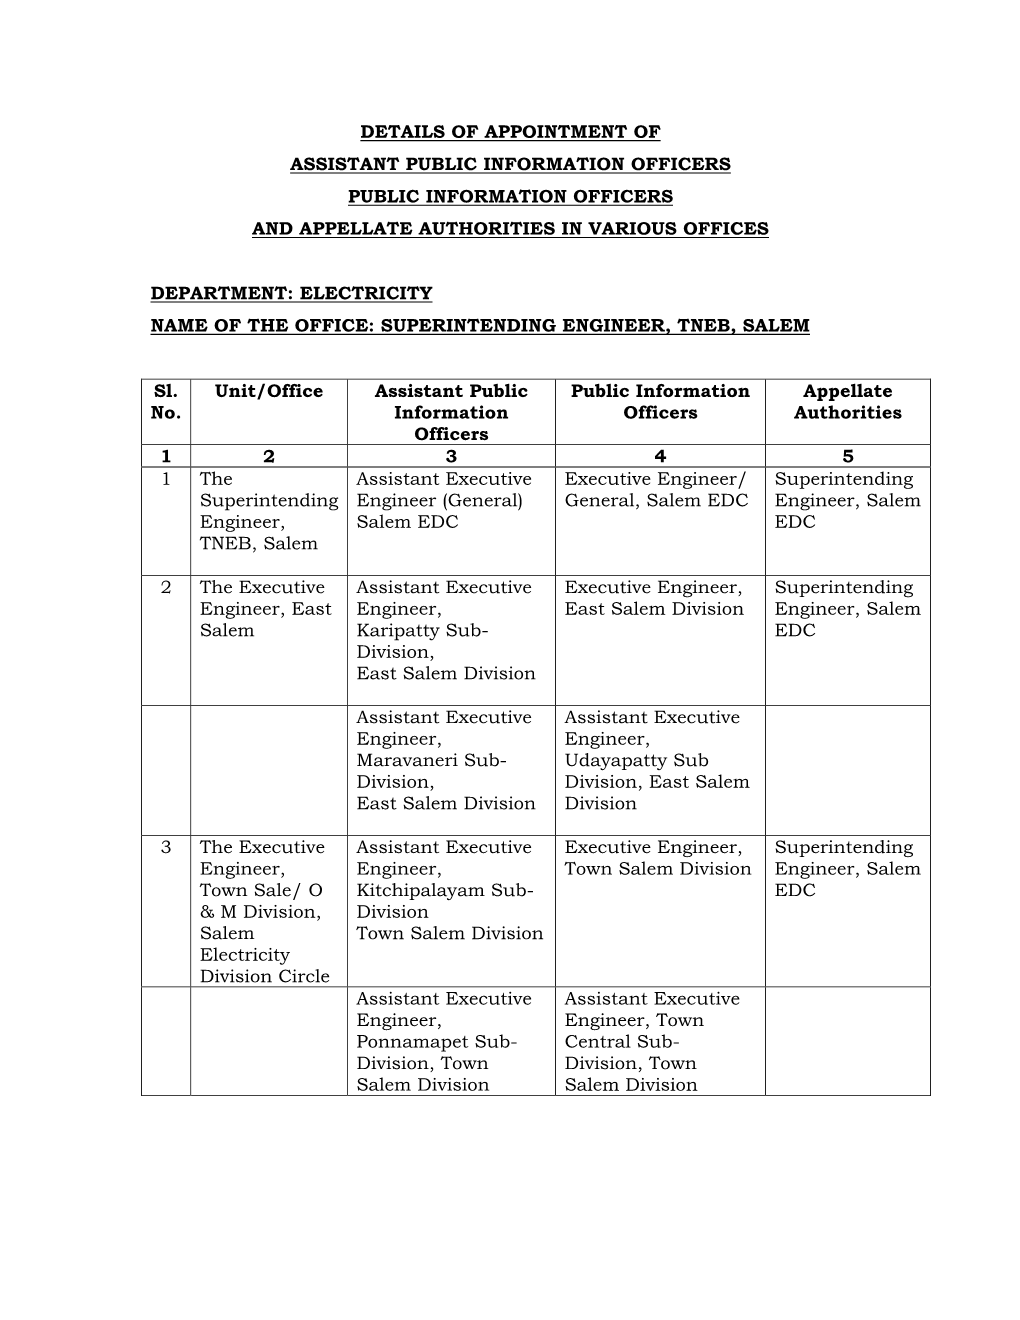 Details of Appointment of Assistant Public Information Officers Public Information Officers and Appellate Authorities in Various Offices